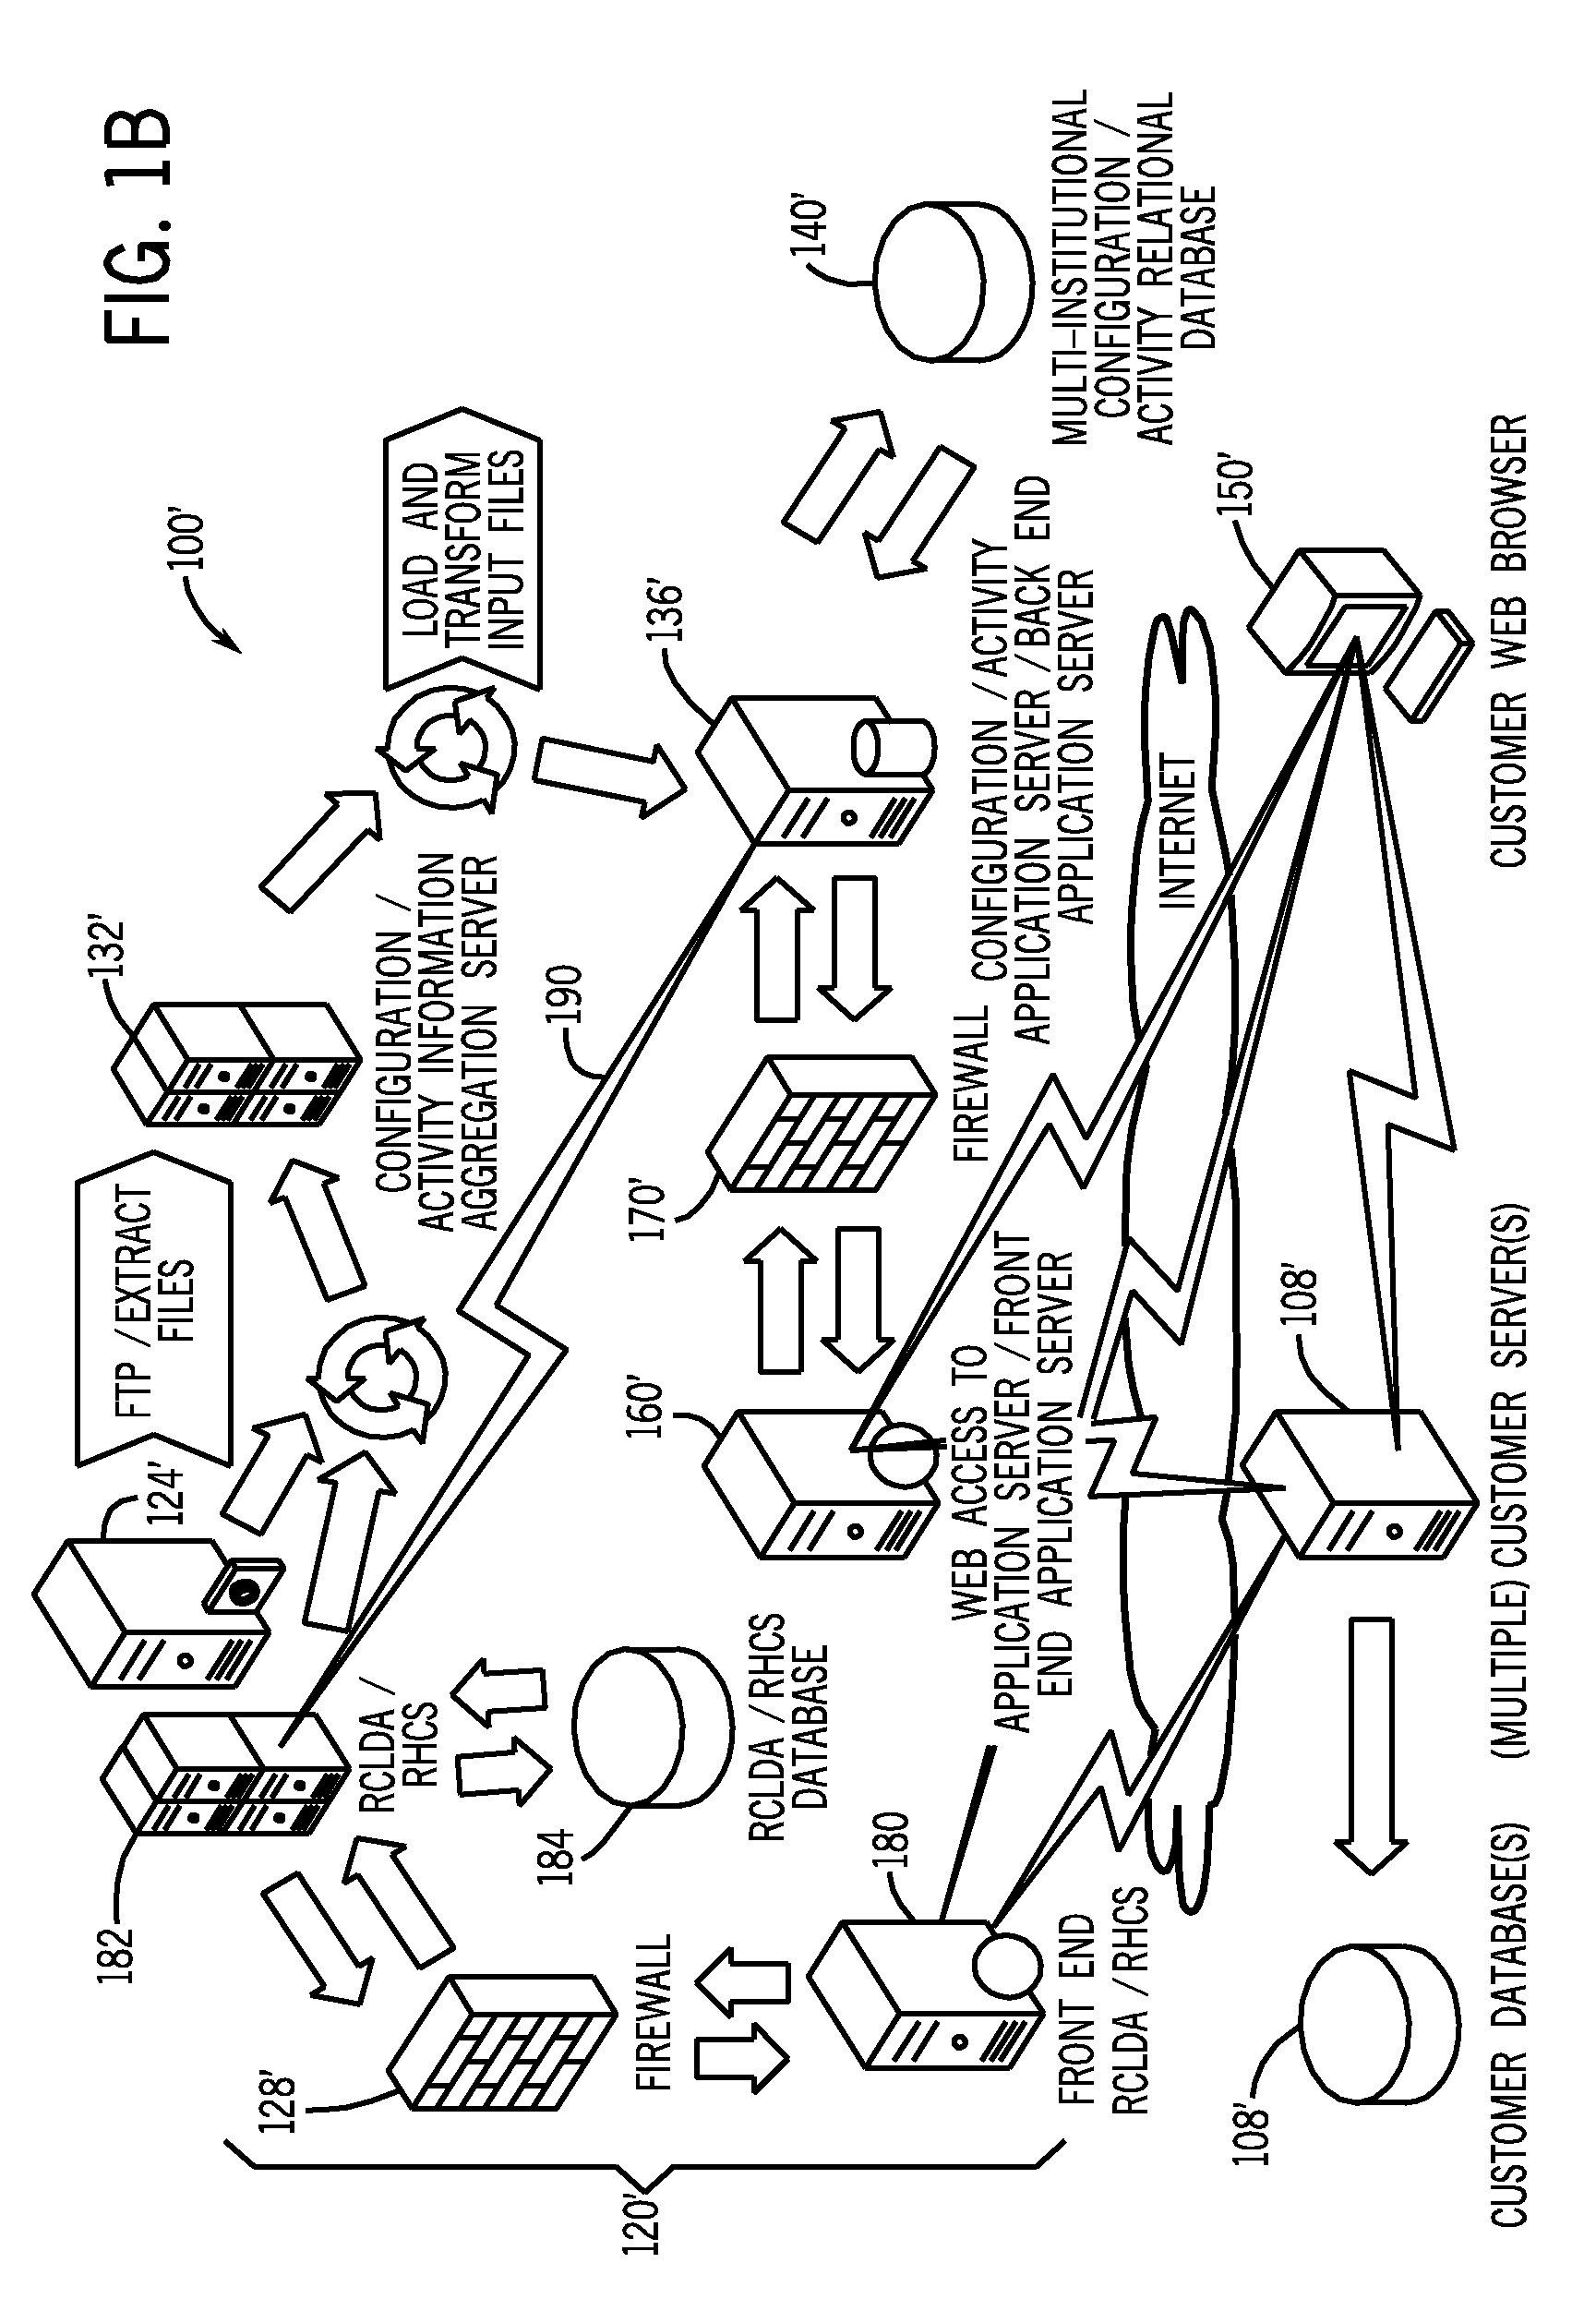 System and method for comparing and utilizing activity information and configuration information from multiple device management systems